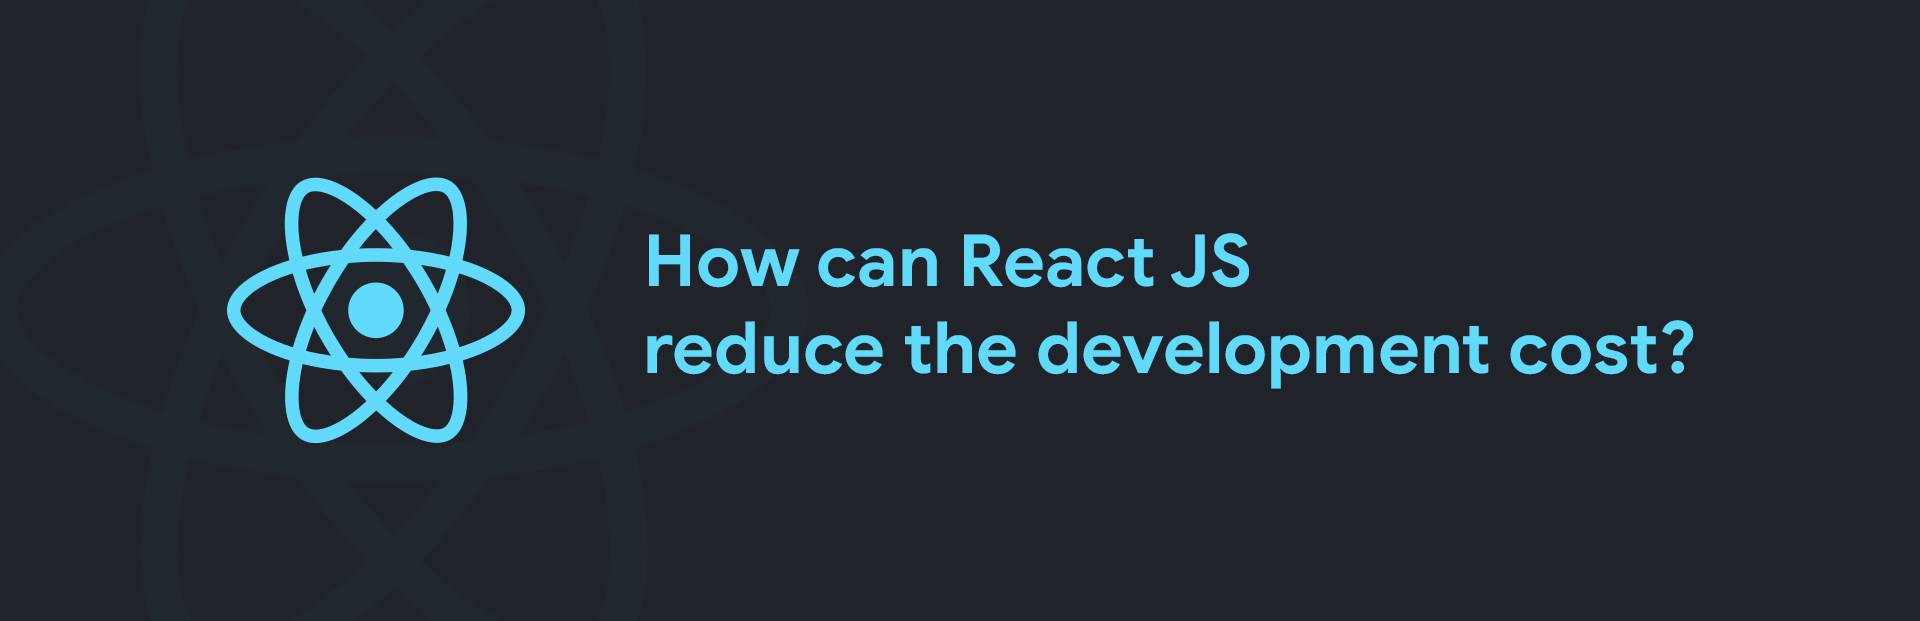 How can React JS help reduce the development cost?